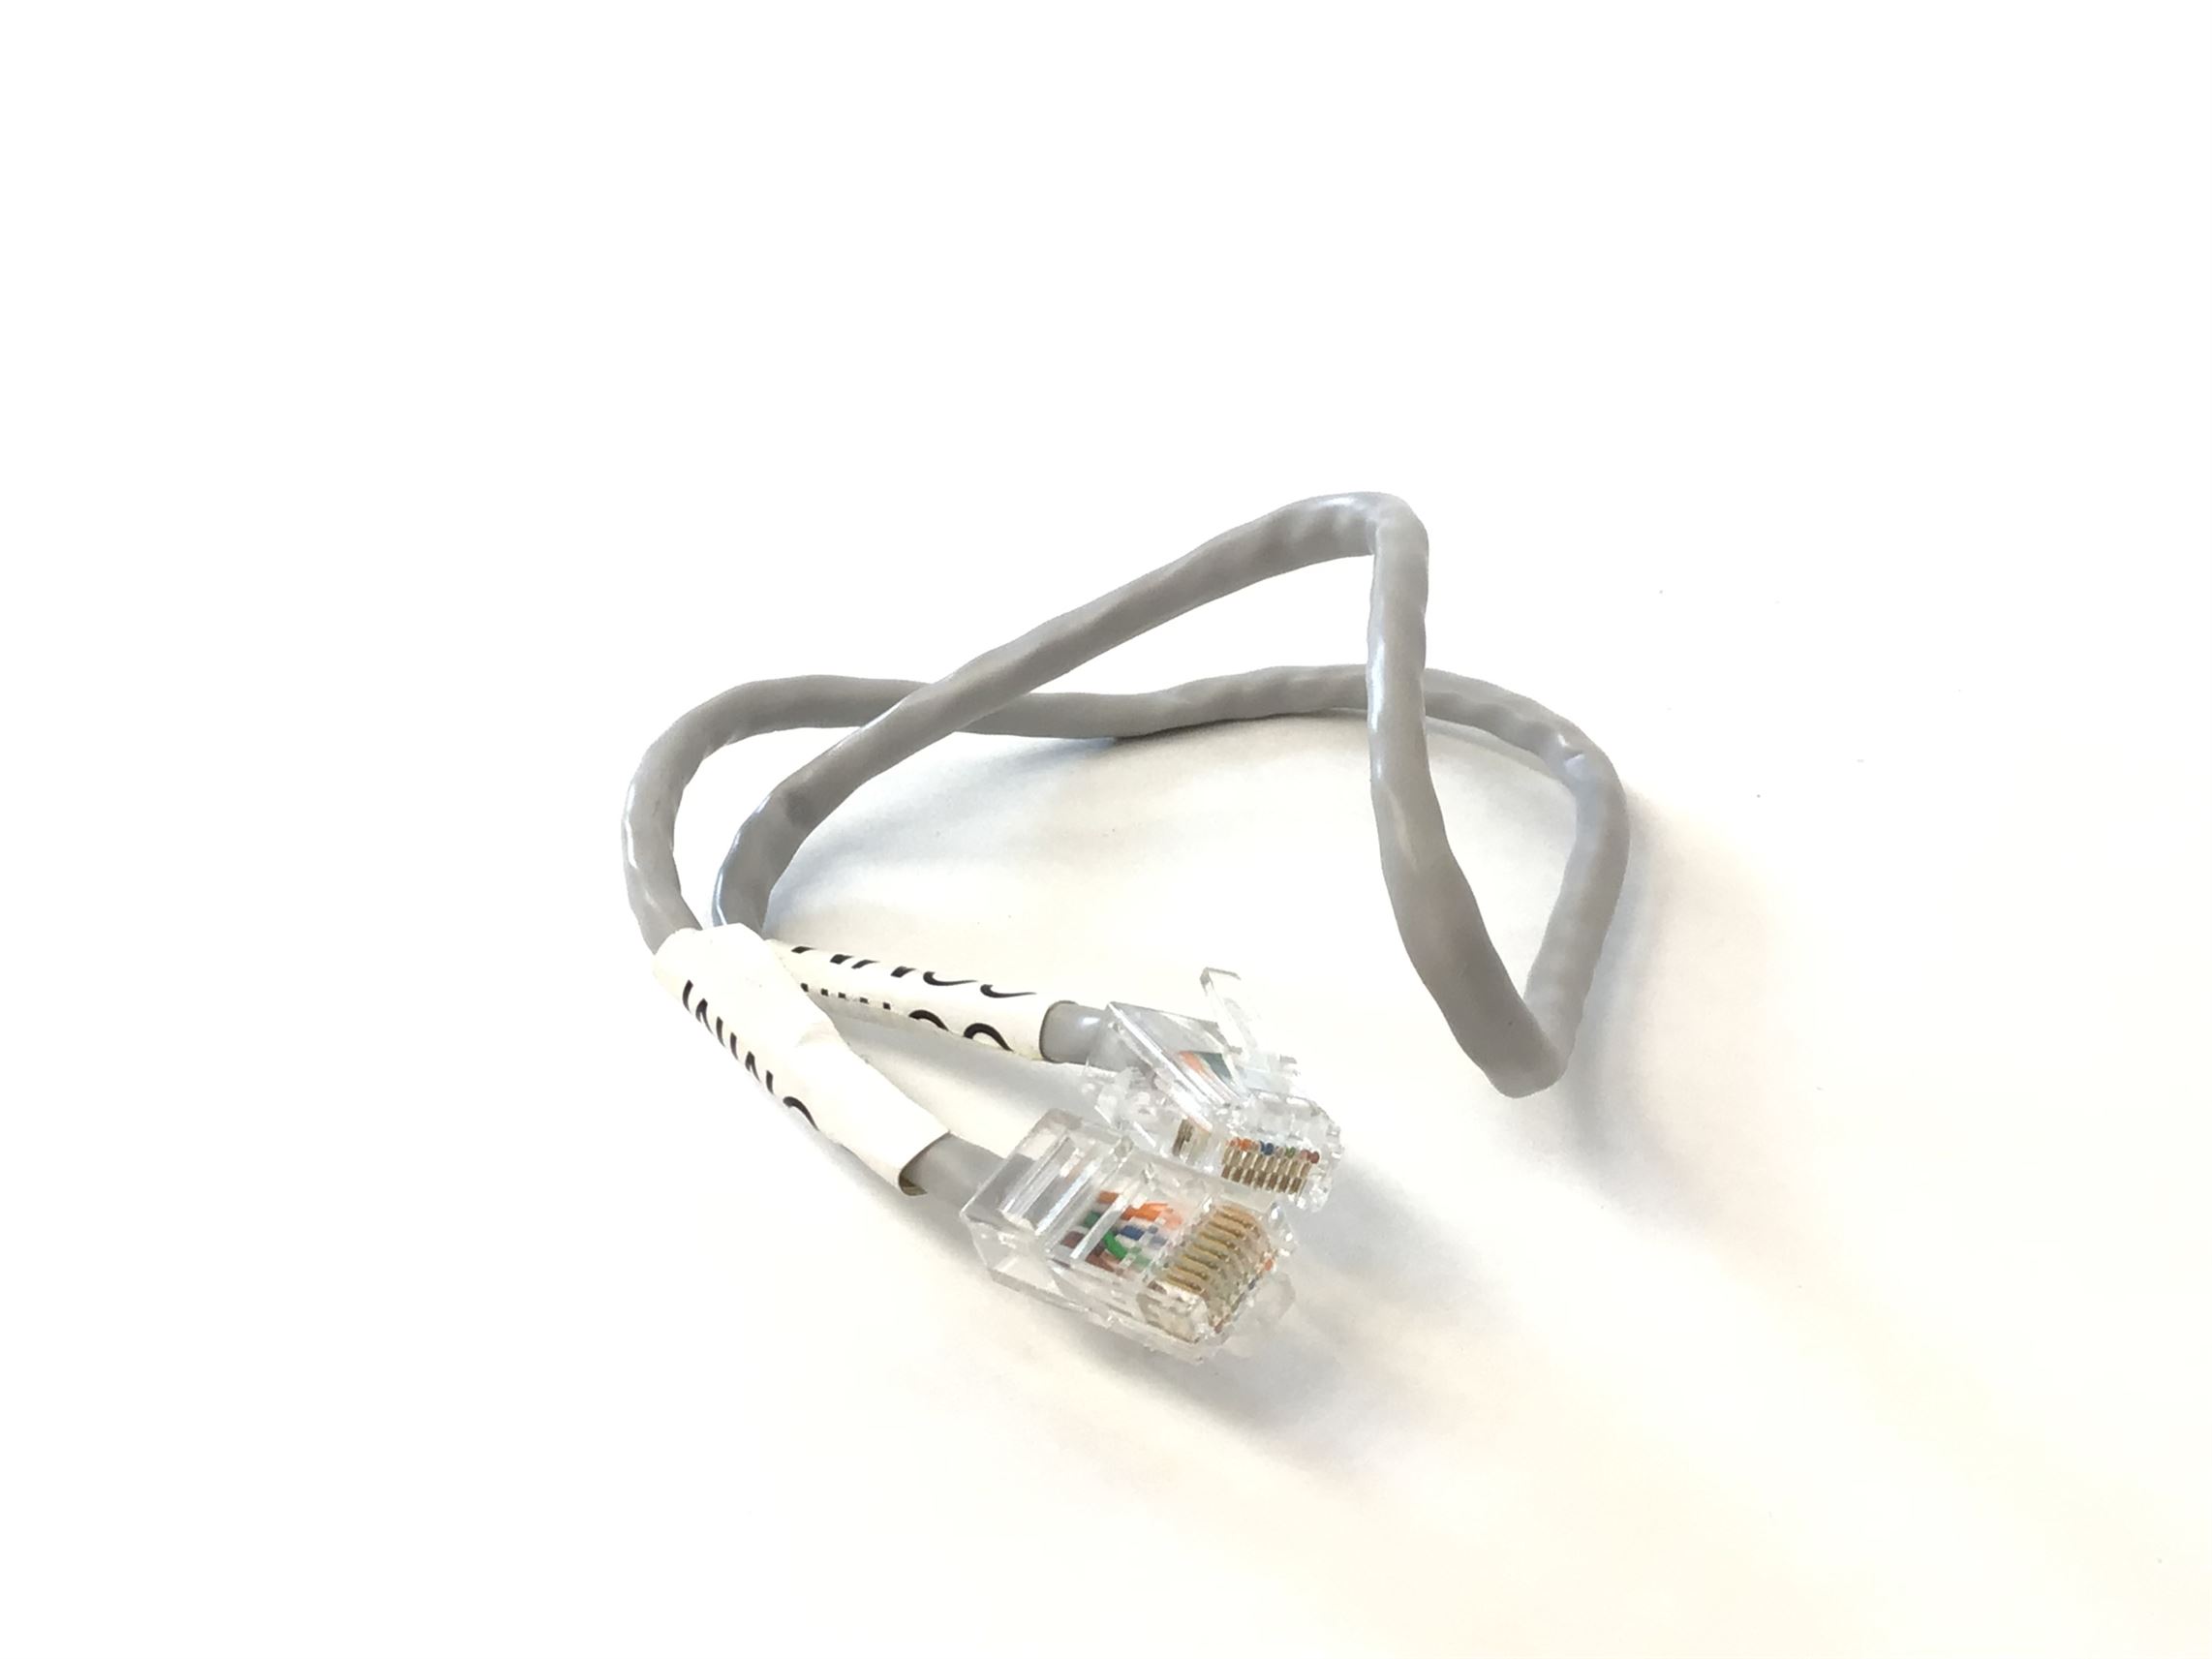 rj45 network cable (top)